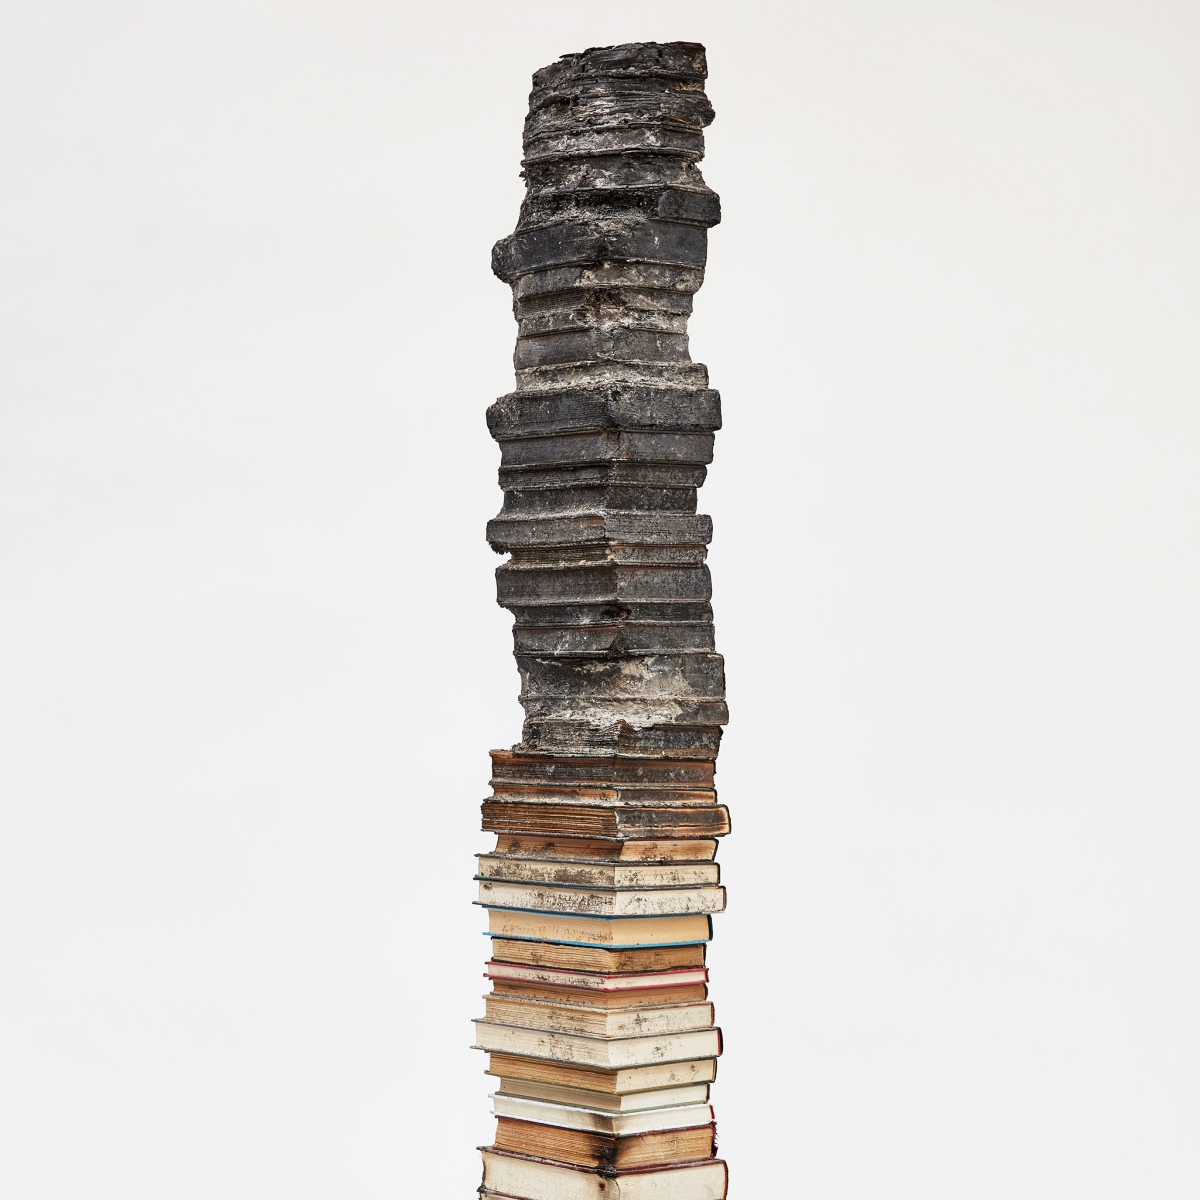 One of Jared's stacks of books is charred from the top down